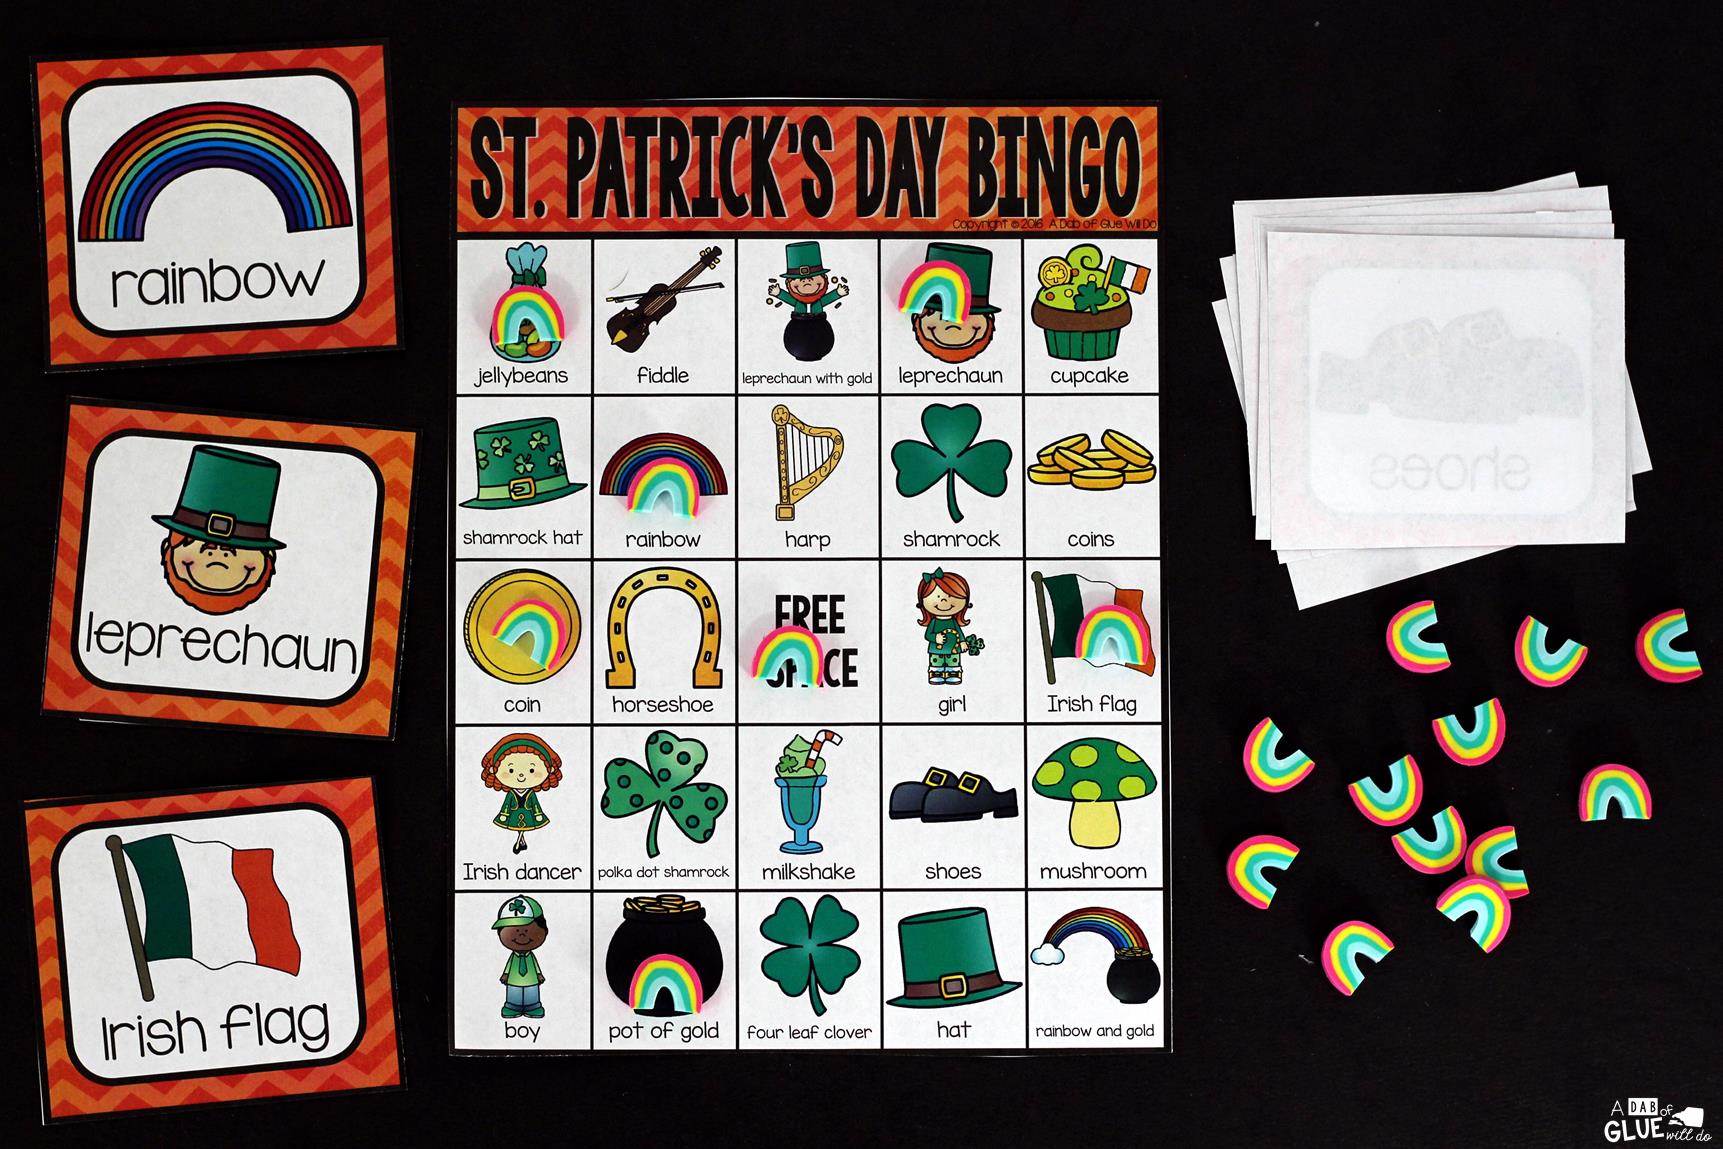 Play Bingo with your elementary age students for a fun St. Patrick's Day themed game! Bingo Sheets for St. Patrick's Day is perfect for large groups in your classroom or small review groups. Add this to your St. Patrick's Day party with 30 unique themed Bingo boards with your students! Teaching cards are also included in this fun game for young children! Black and white options available to save your color ink.